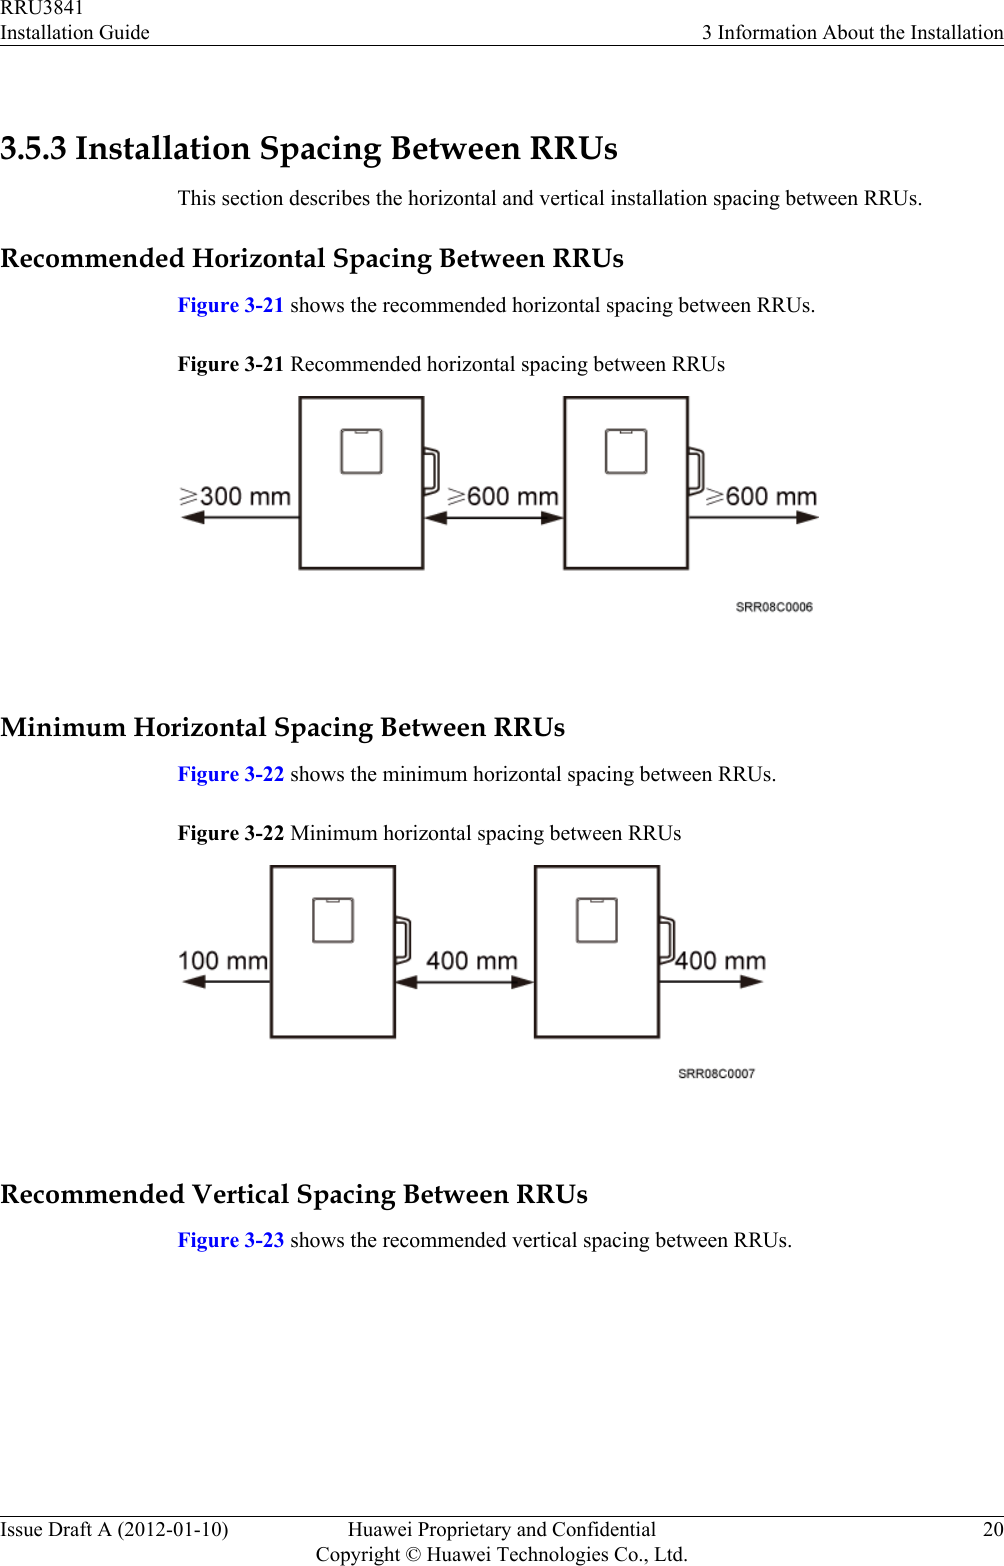  3.5.3 Installation Spacing Between RRUsThis section describes the horizontal and vertical installation spacing between RRUs.Recommended Horizontal Spacing Between RRUsFigure 3-21 shows the recommended horizontal spacing between RRUs.Figure 3-21 Recommended horizontal spacing between RRUs Minimum Horizontal Spacing Between RRUsFigure 3-22 shows the minimum horizontal spacing between RRUs.Figure 3-22 Minimum horizontal spacing between RRUs Recommended Vertical Spacing Between RRUsFigure 3-23 shows the recommended vertical spacing between RRUs.RRU3841Installation Guide 3 Information About the InstallationIssue Draft A (2012-01-10) Huawei Proprietary and ConfidentialCopyright © Huawei Technologies Co., Ltd.20